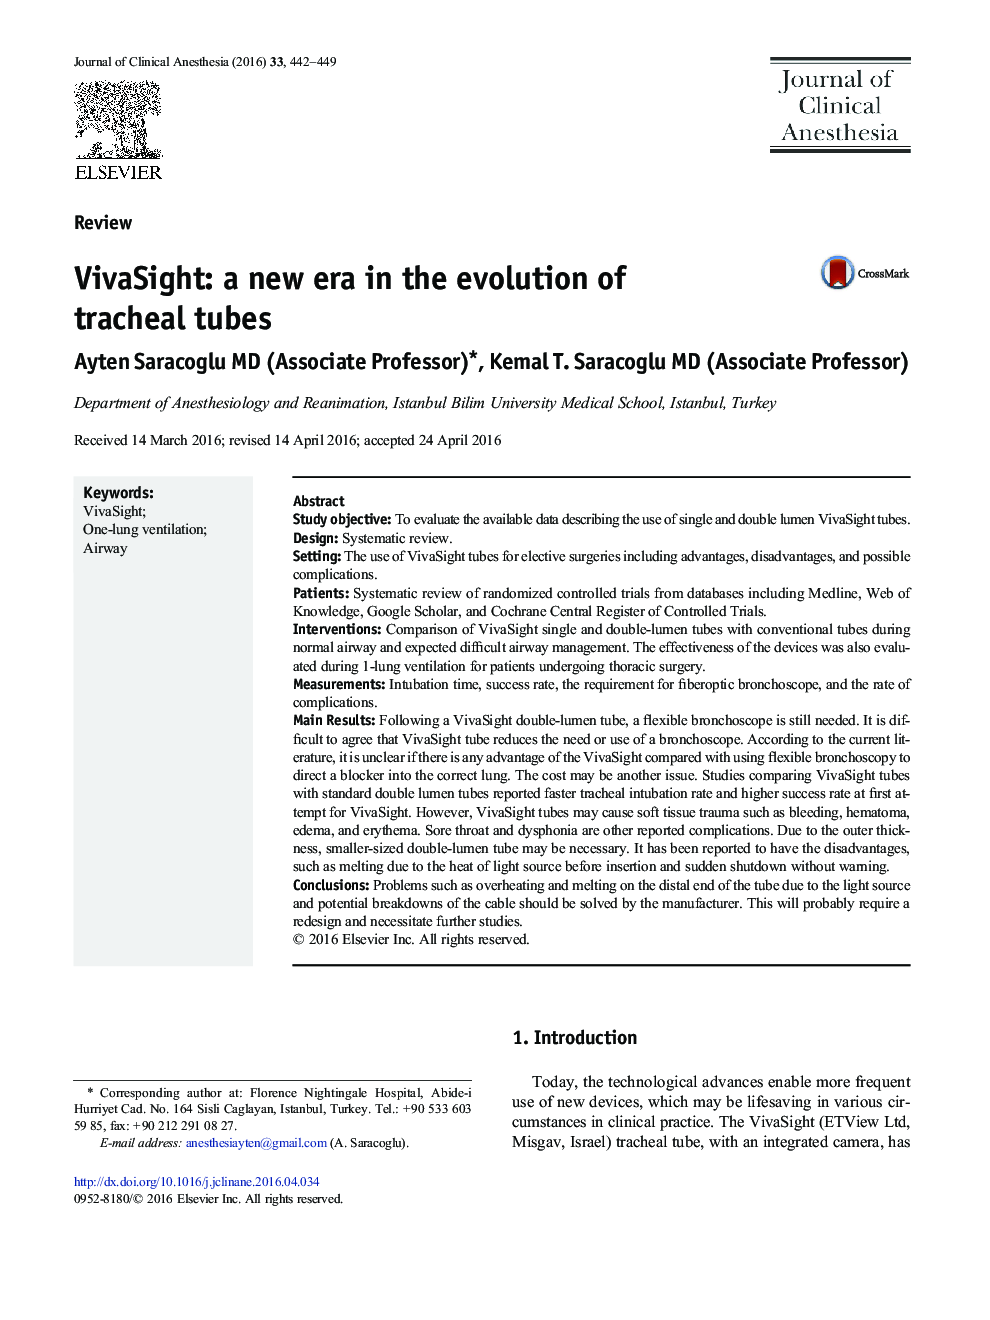 VivaSight: a new era in the evolution of tracheal tubes